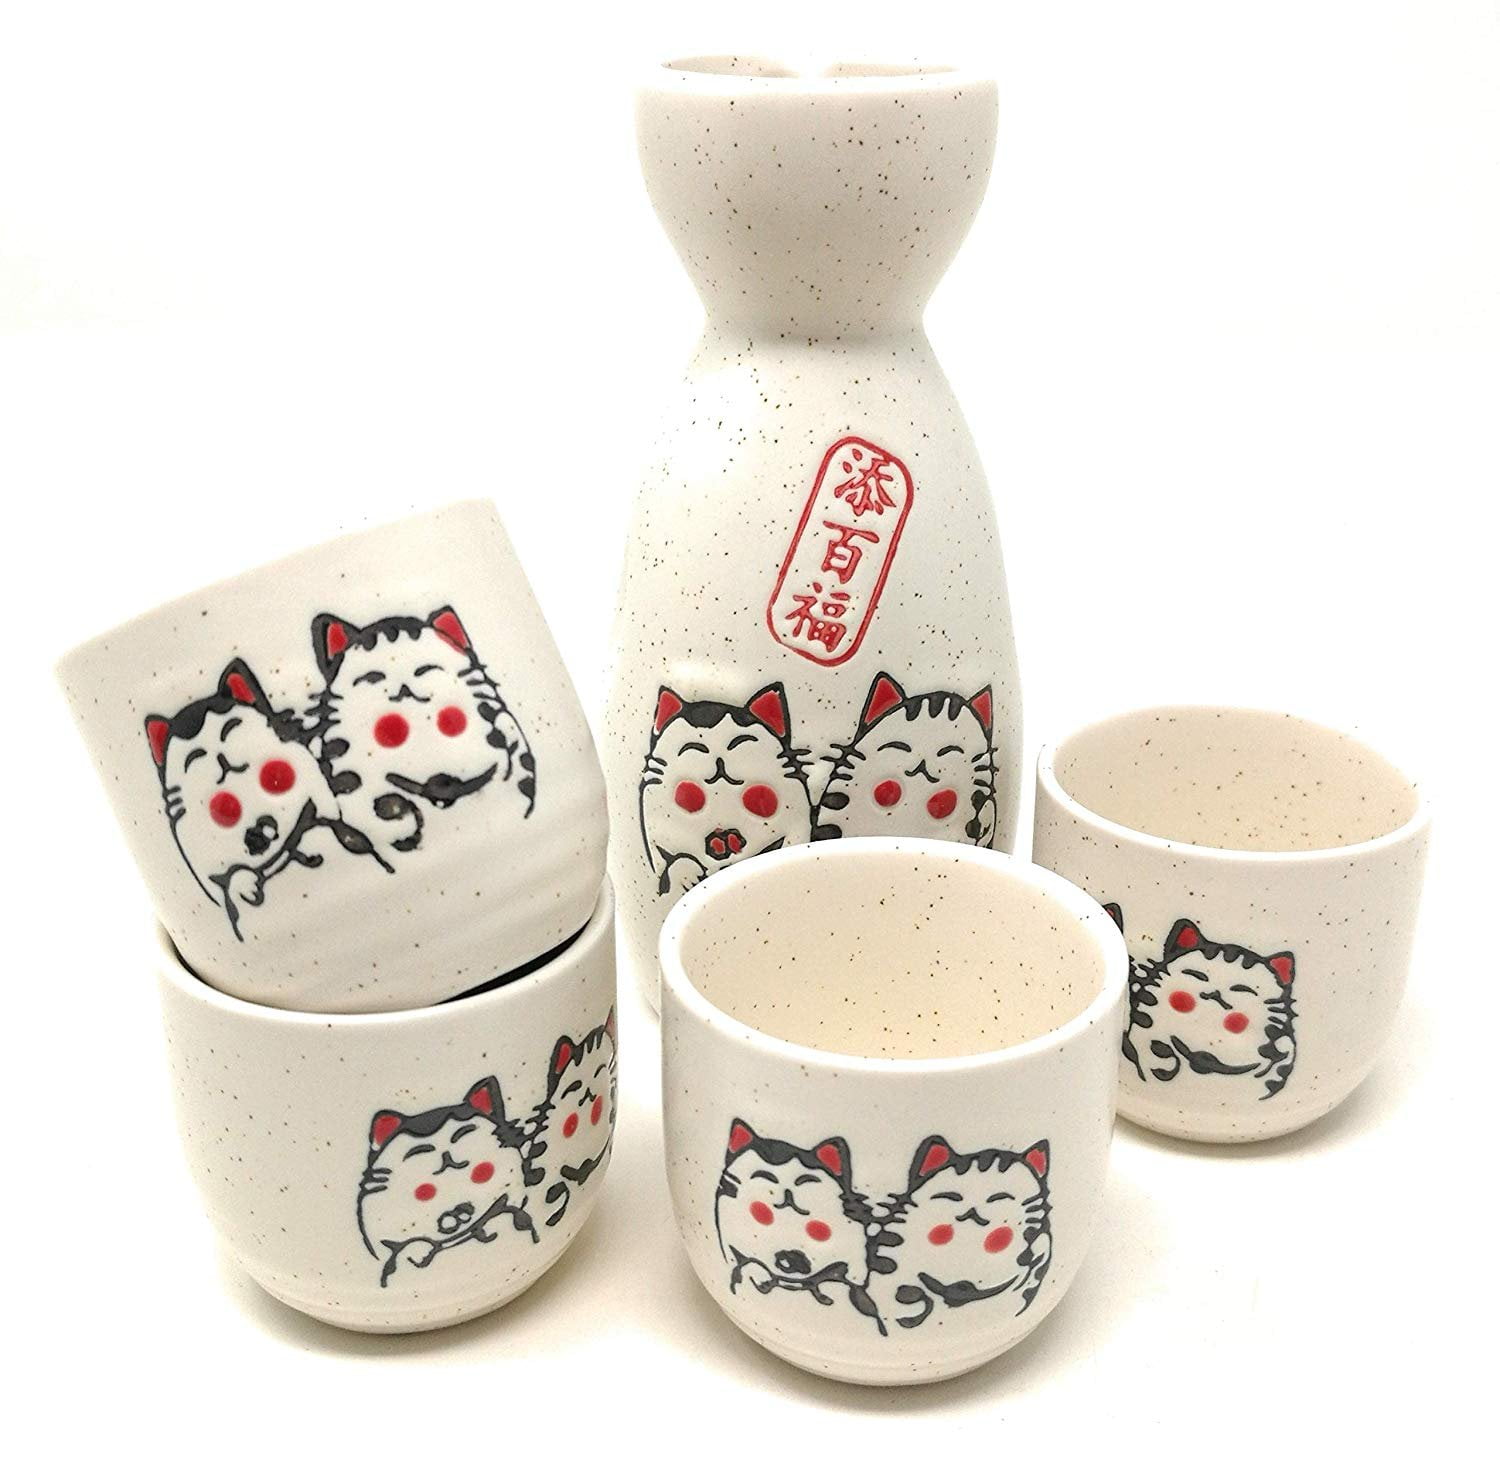 Veemoon Ceramic Sake Cup Wine Carafe Sake pour Pot and 8 Cups Chinese Japanese Wine Sake Drinking Cup Multifunctional Tea Cup Wine Flagon Cups